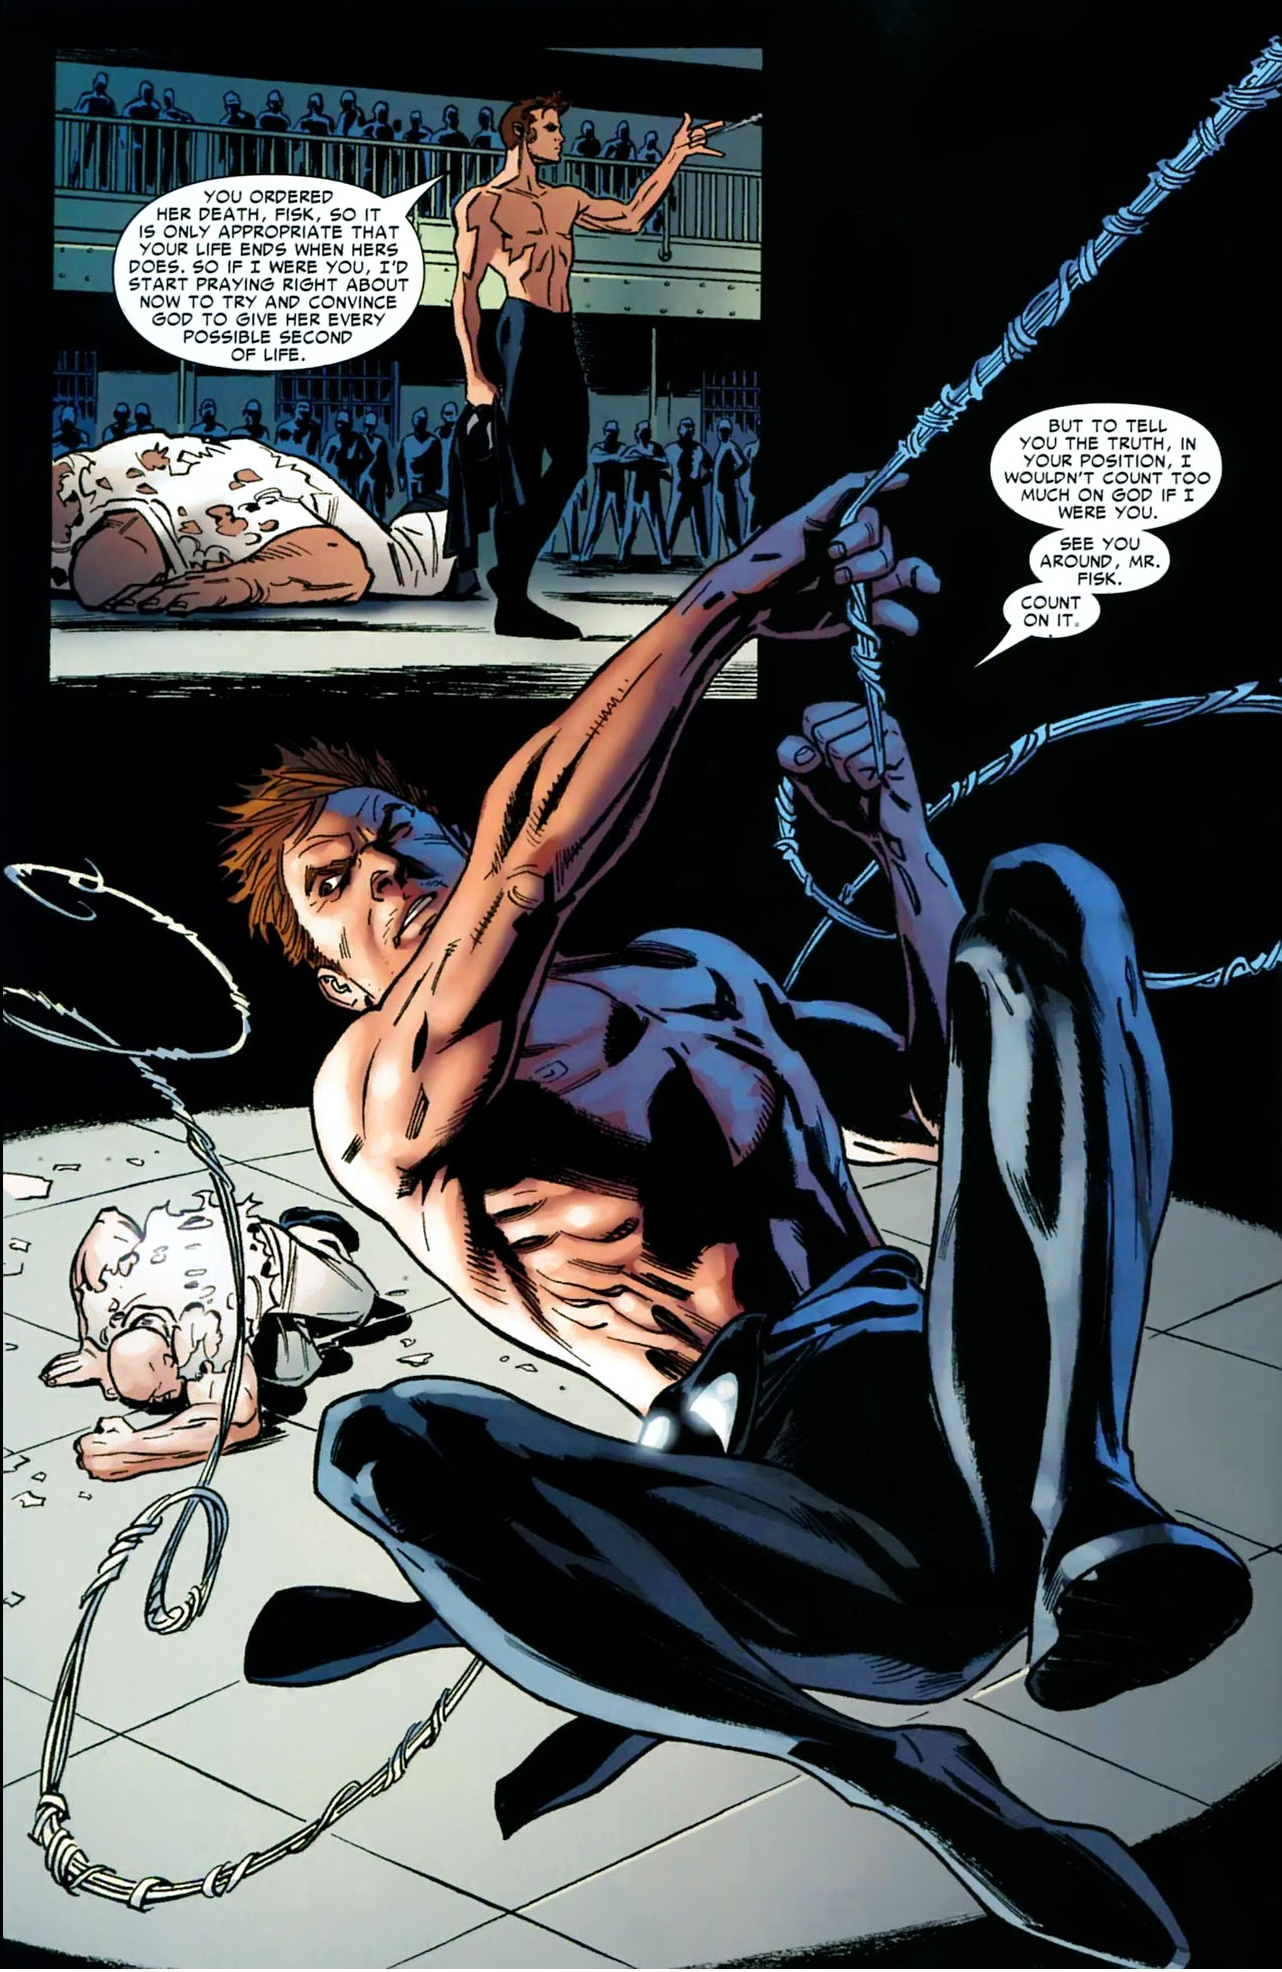 How Peter Parker “Killed” The Kingpin – Comicnewbies